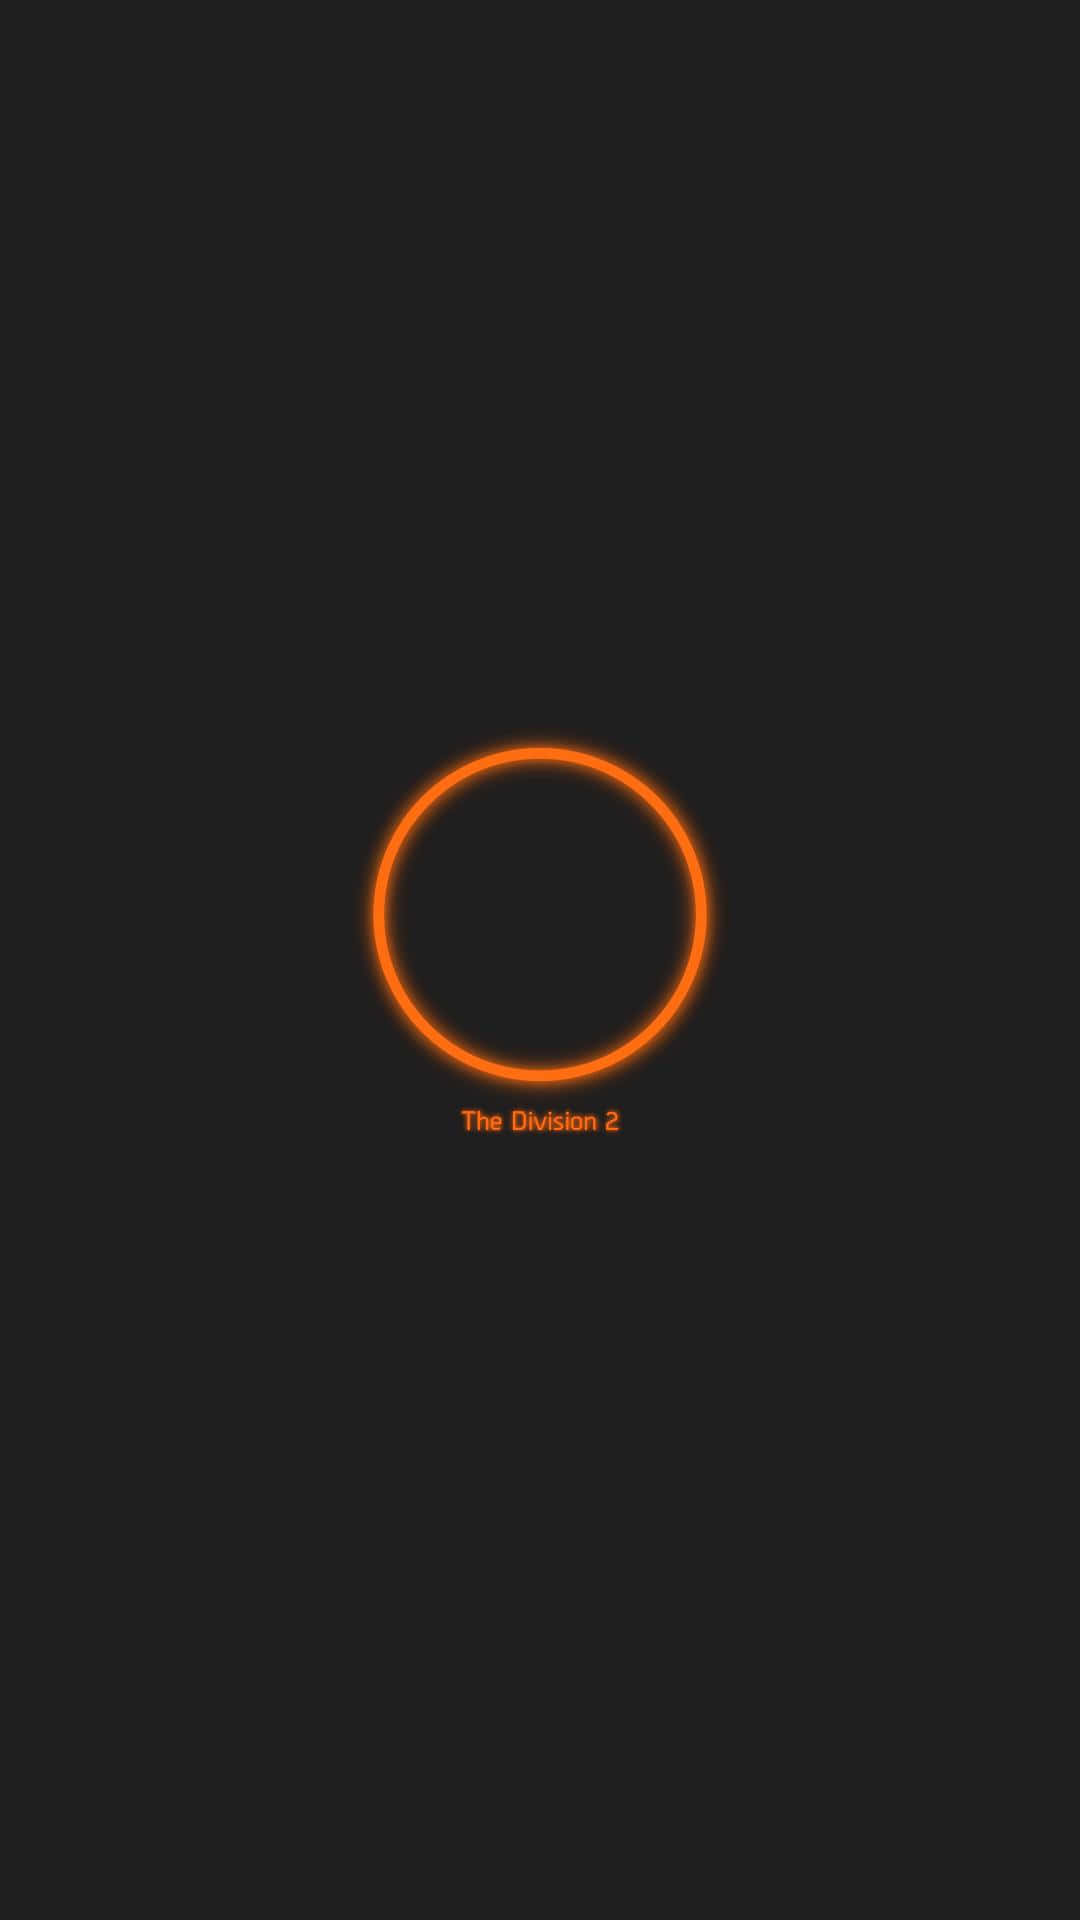 Download Orange Logo Android The Division Background | Wallpapers.com